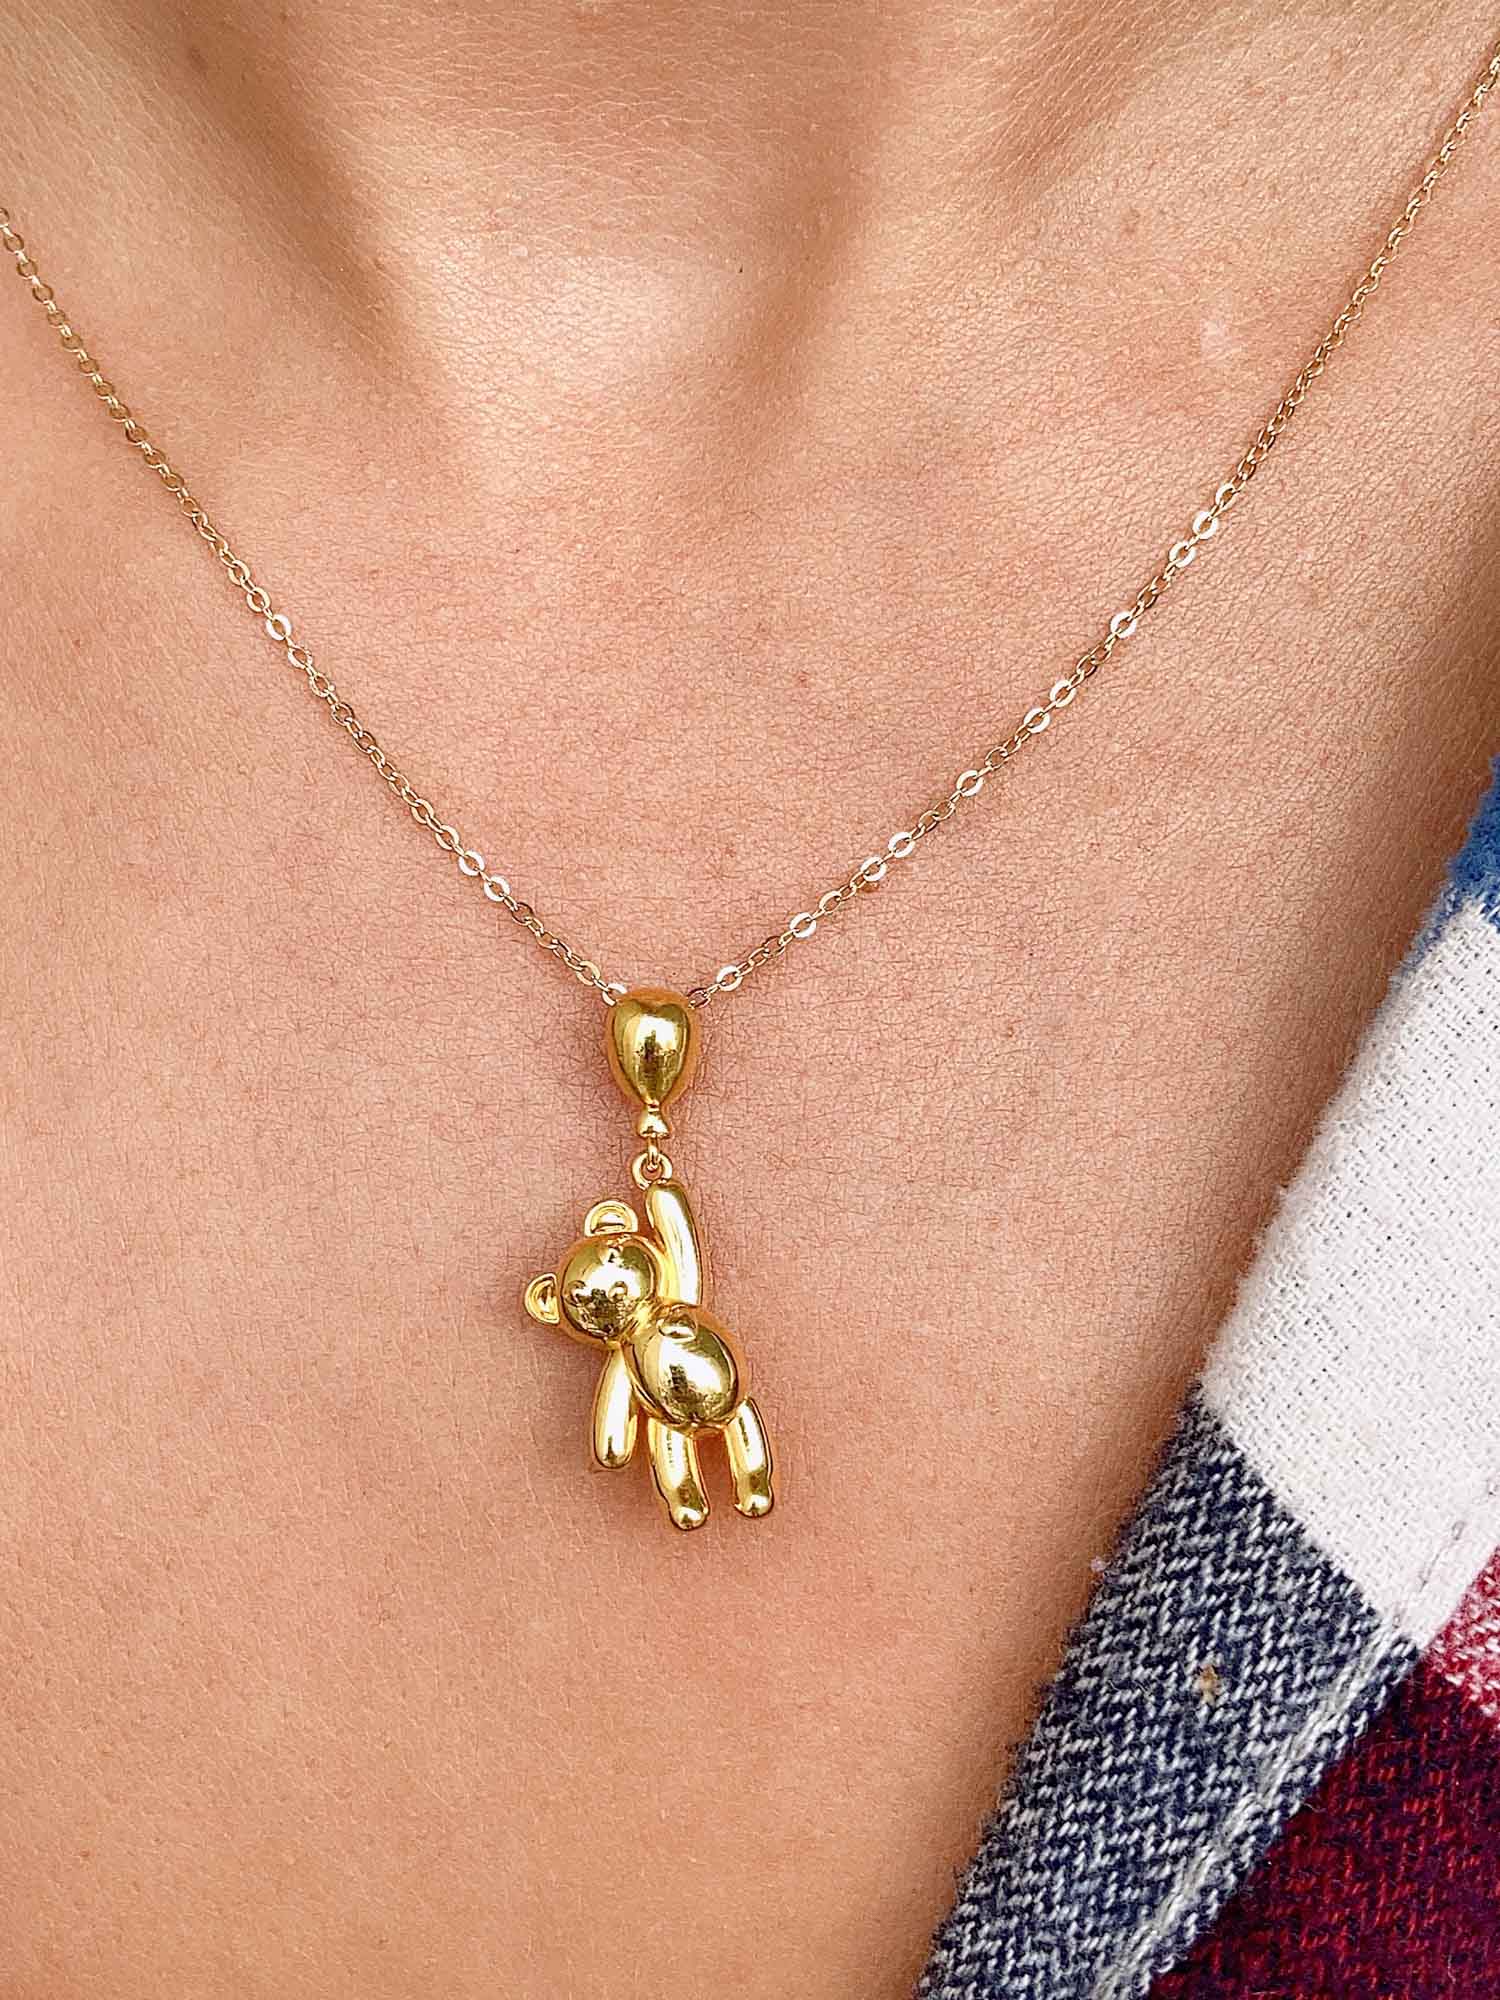 Teddy Bear Charm Necklace 14k Solid Gold | Everyday Jewelry